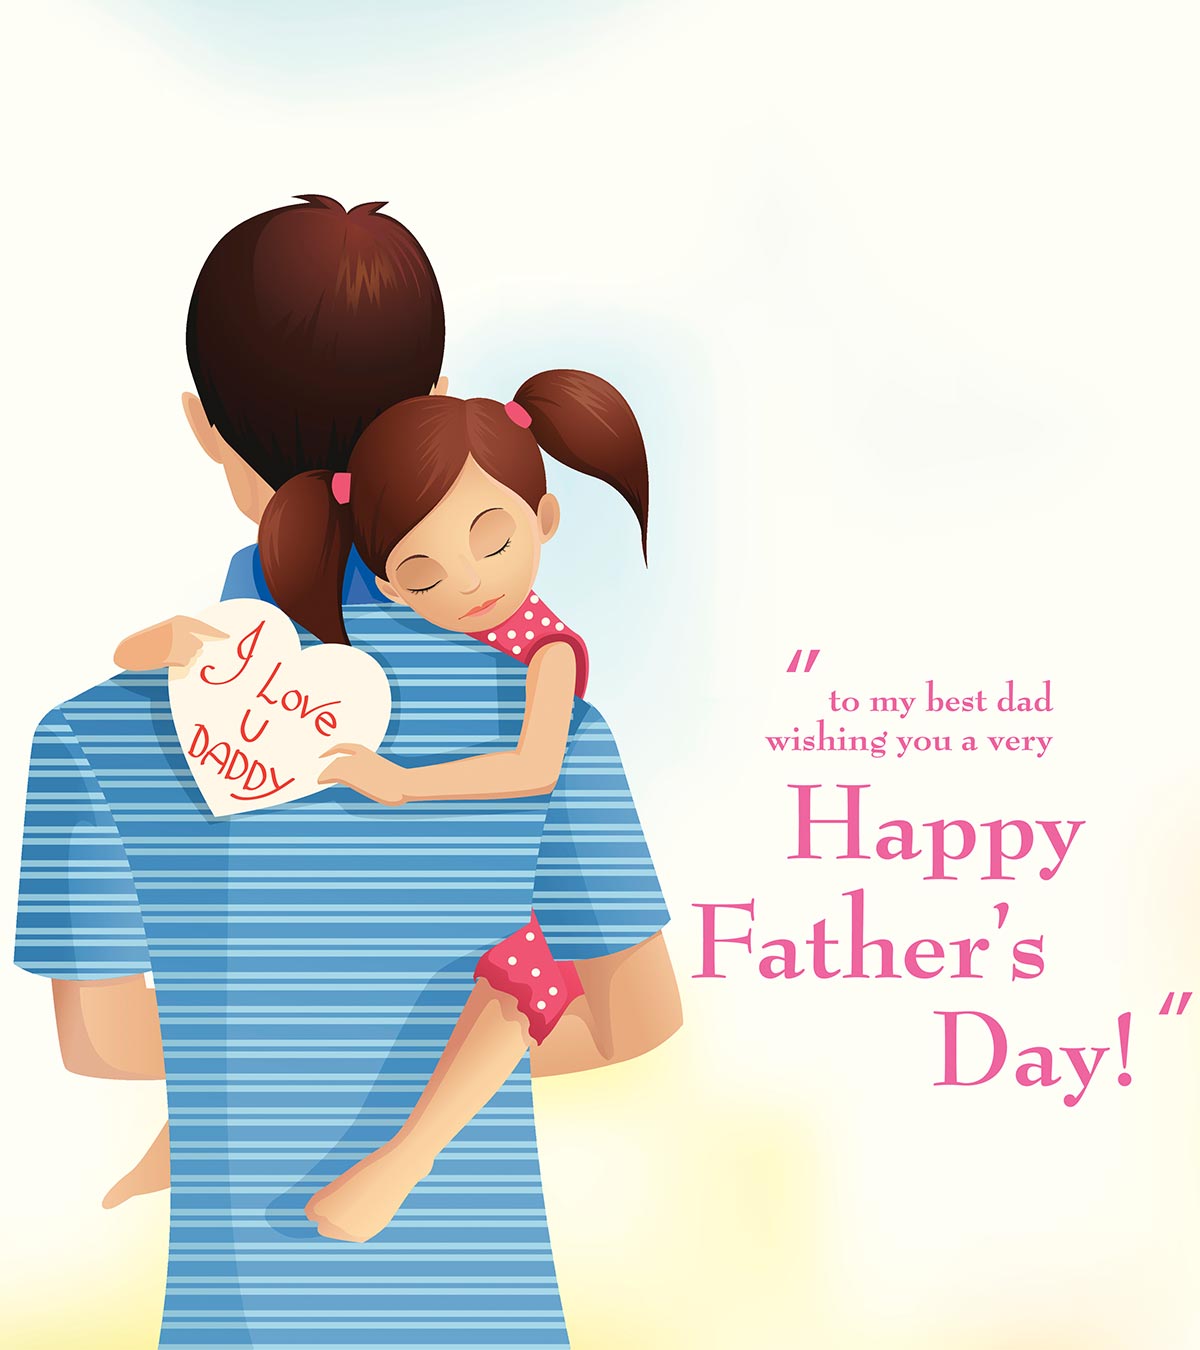 Heartfelt Father's Day Quotes To Share With Your Dad